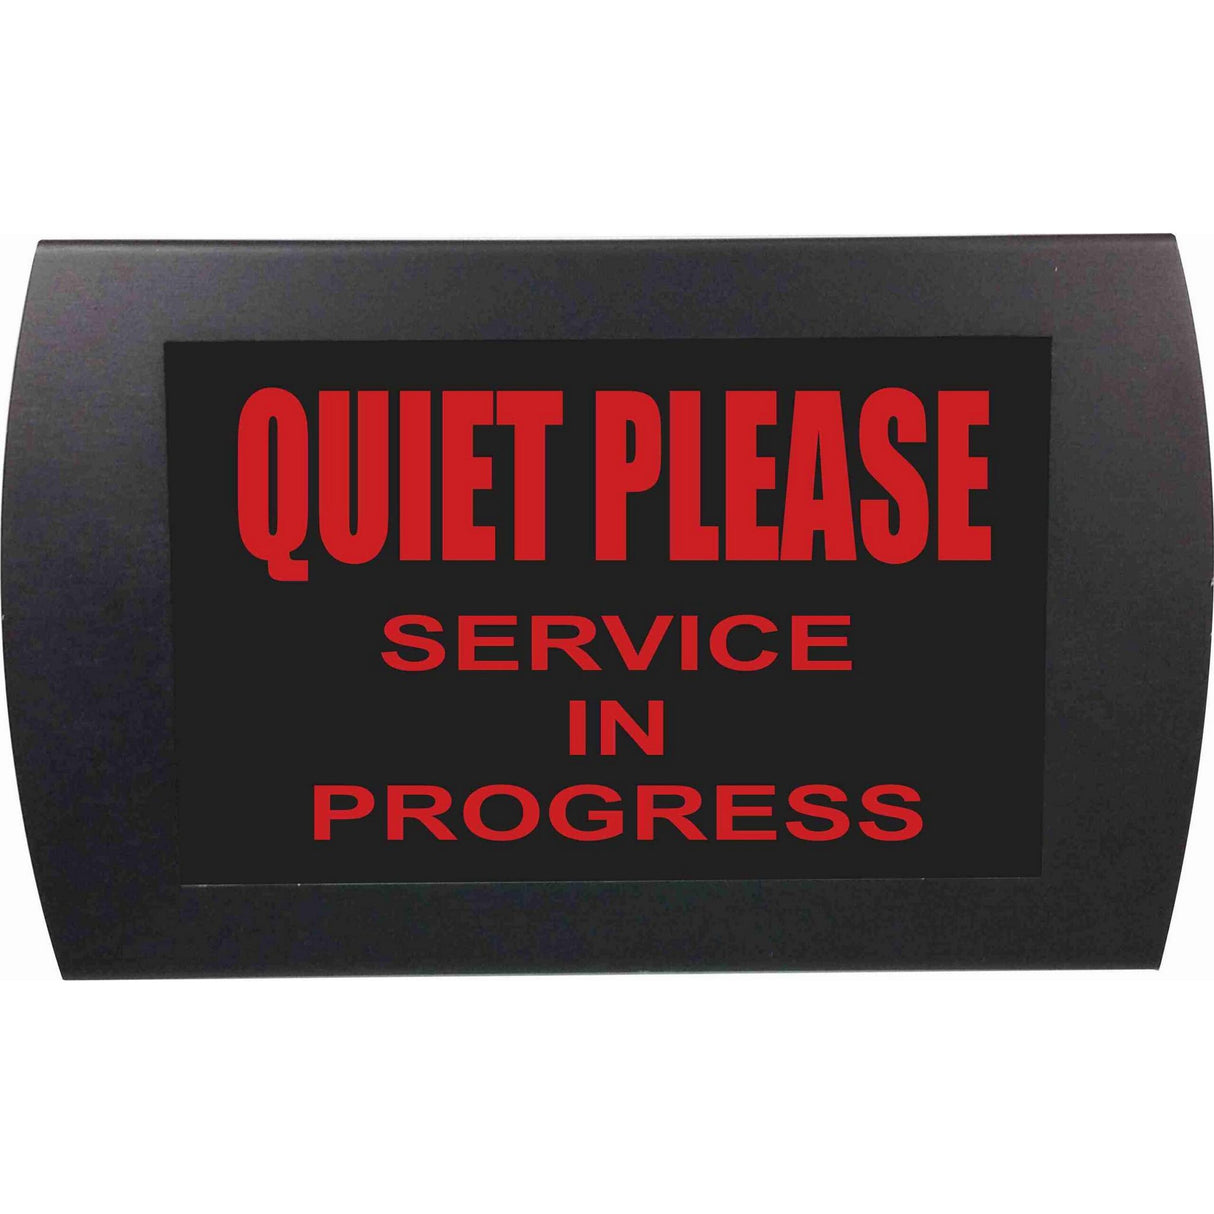 American Recorder OAS-2008M-RD "QUIET PLEASE - SERVICE IN PROGRESS" LED Lighted Sign, Red